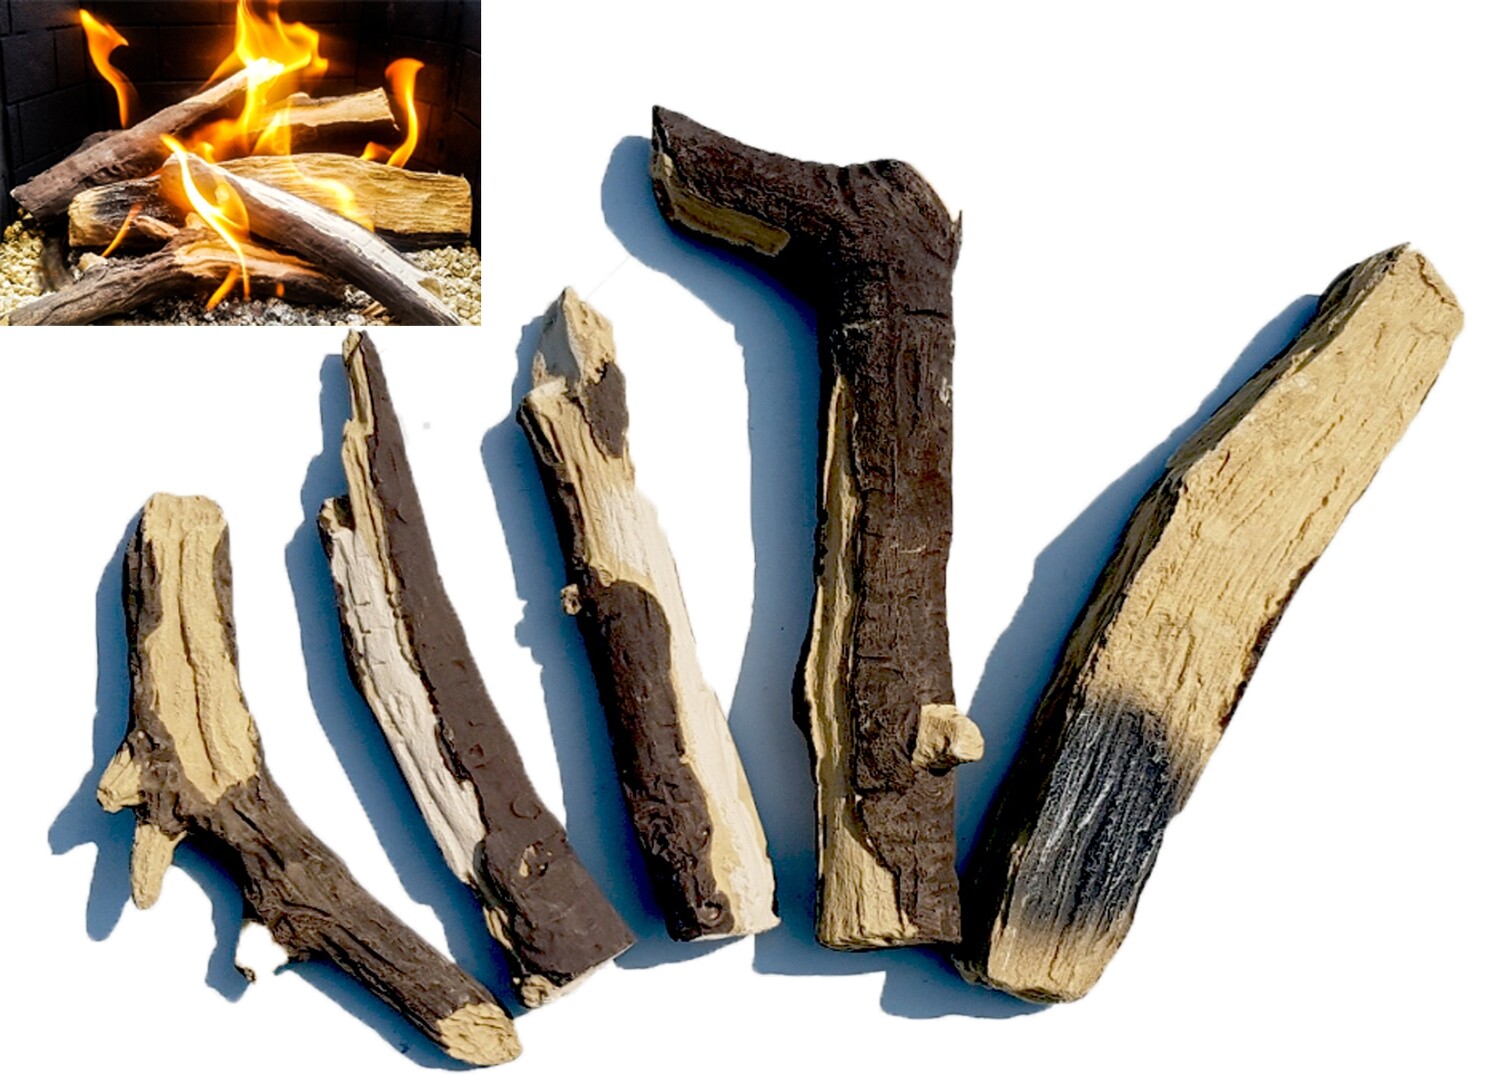 Set Of 5 Large Realistic Ceramic Logs For Gas Fires, Fire Pits And Ethanol Burners